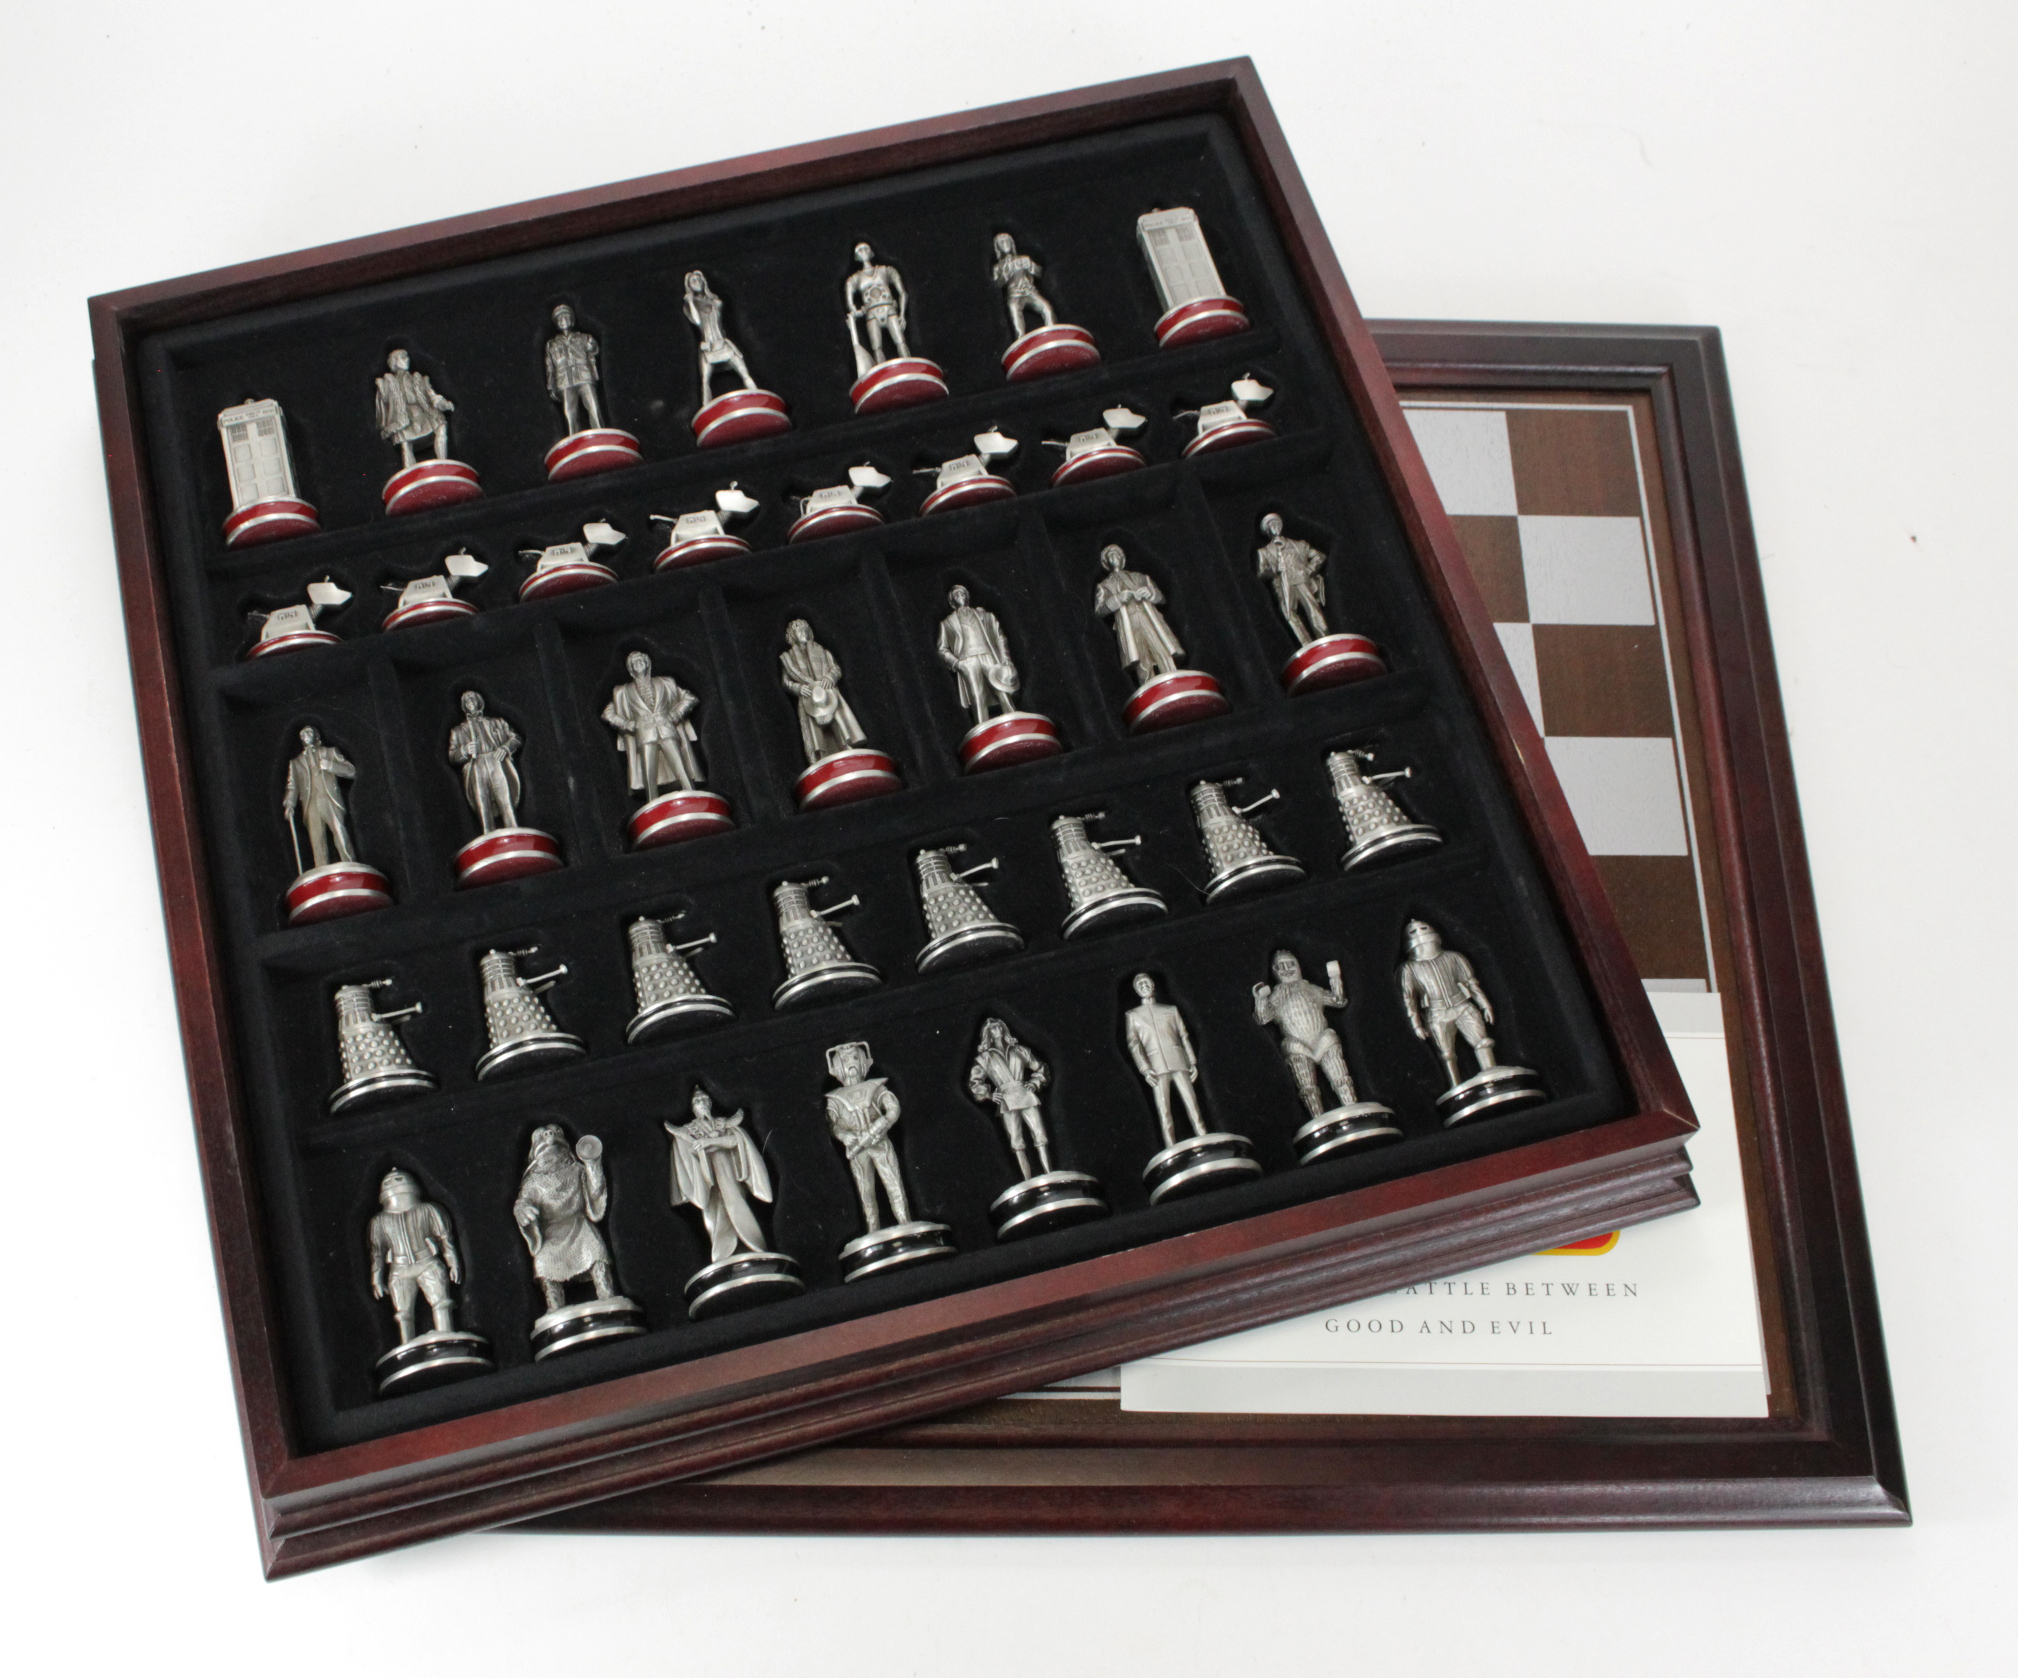 Doctor Who (BBC) chess set by the Danbury Mint, complete with original booklet, contained in